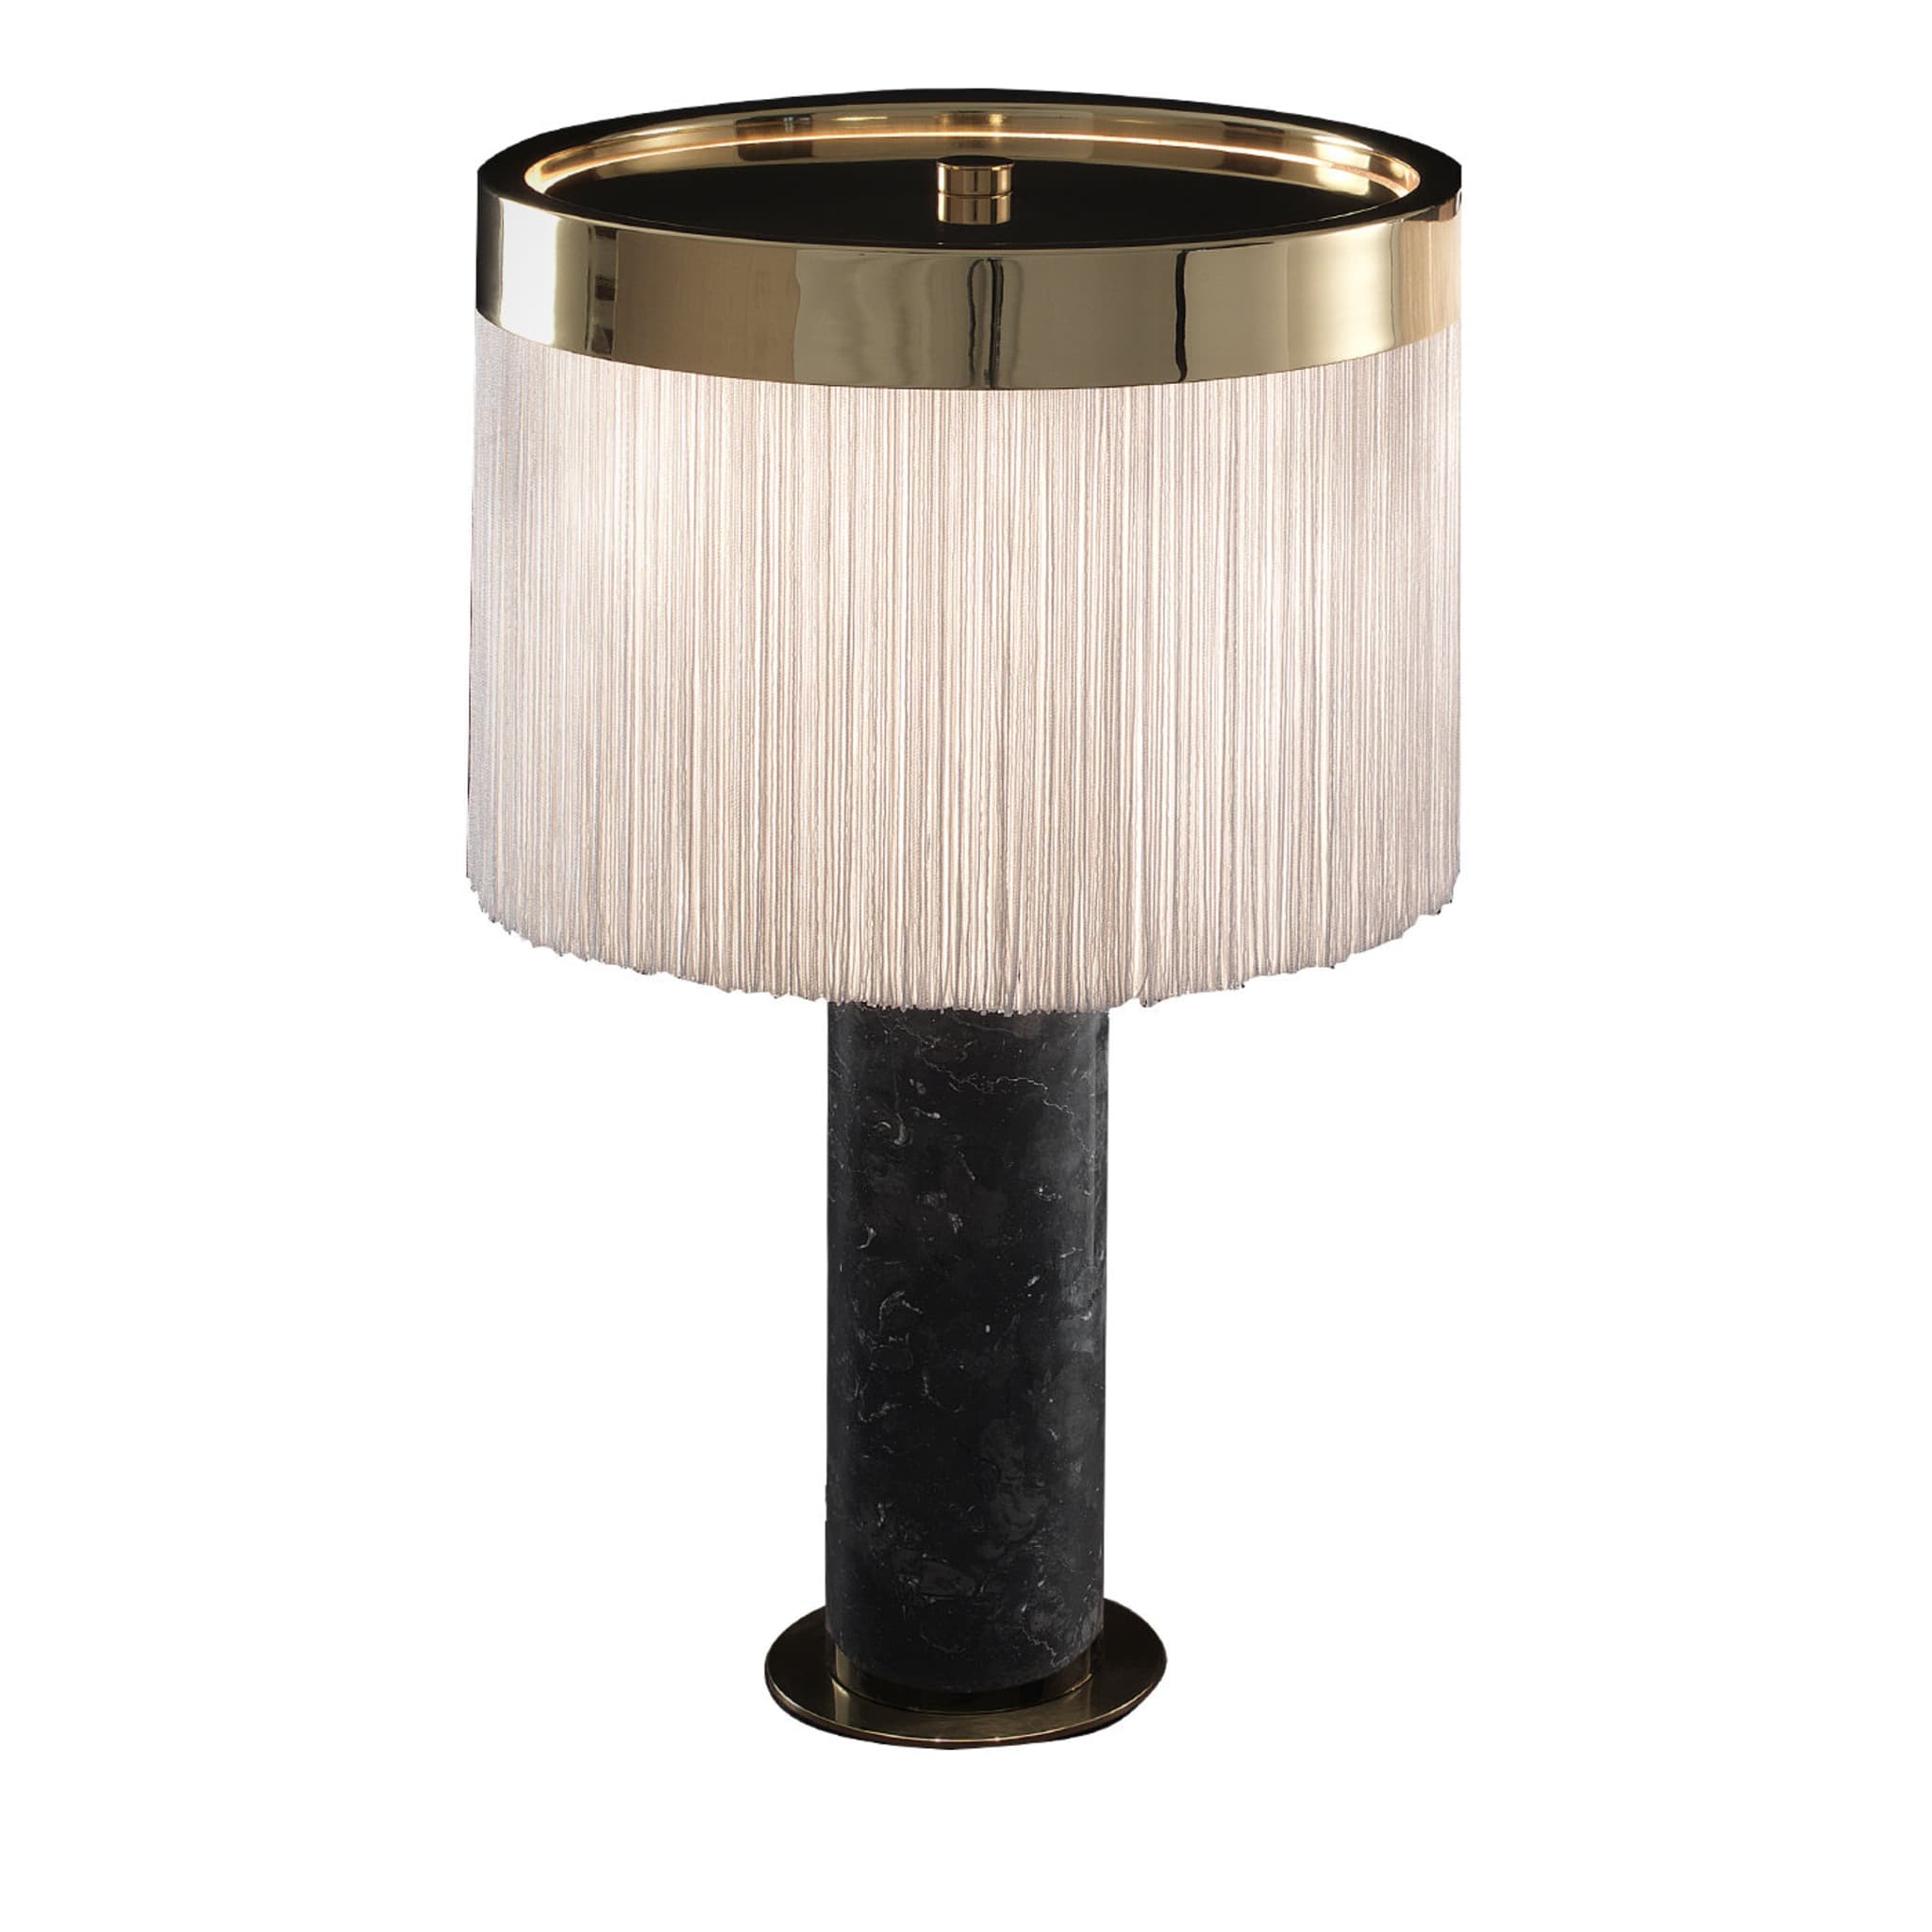 Orsola Black Table Lamp by Bozzoli - Main view